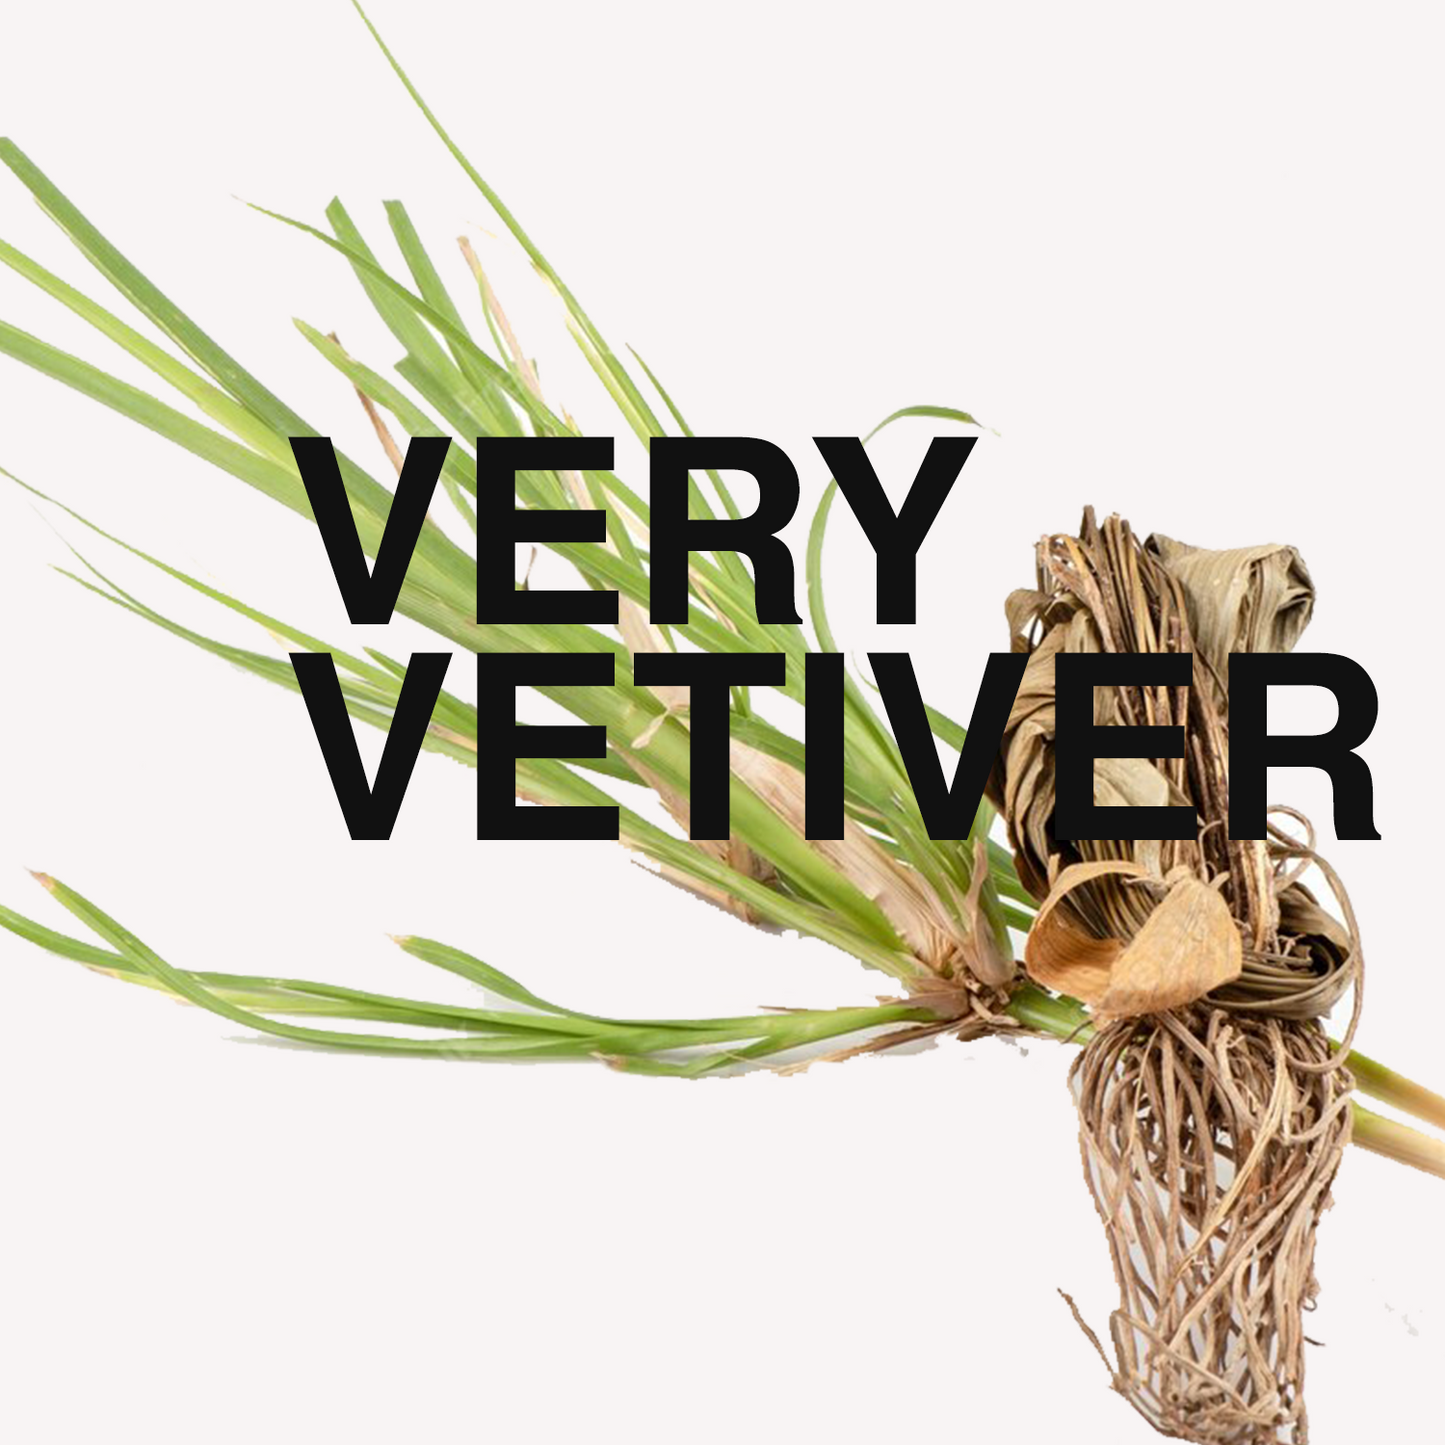 Very vetiver candles - scented soy wax candle in very vertiver a zingy fresh smell to welcome spring and summer